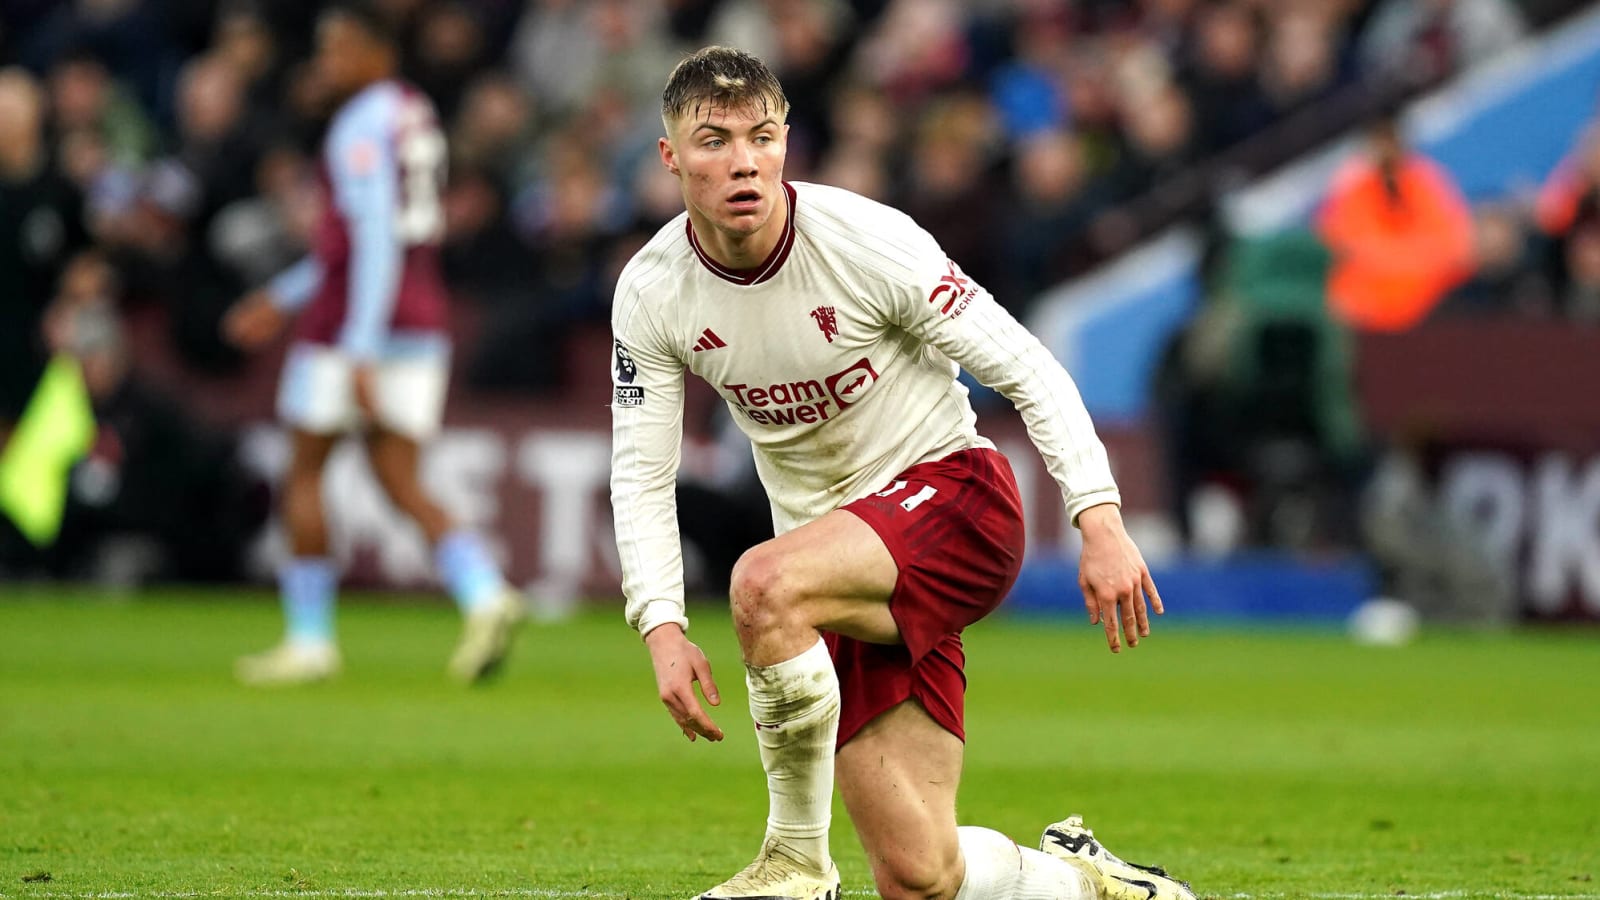 ‘Starting to fly’ – Garth Crooks compares Rasmus Hojlund to former Arsenal and Manchester United striker